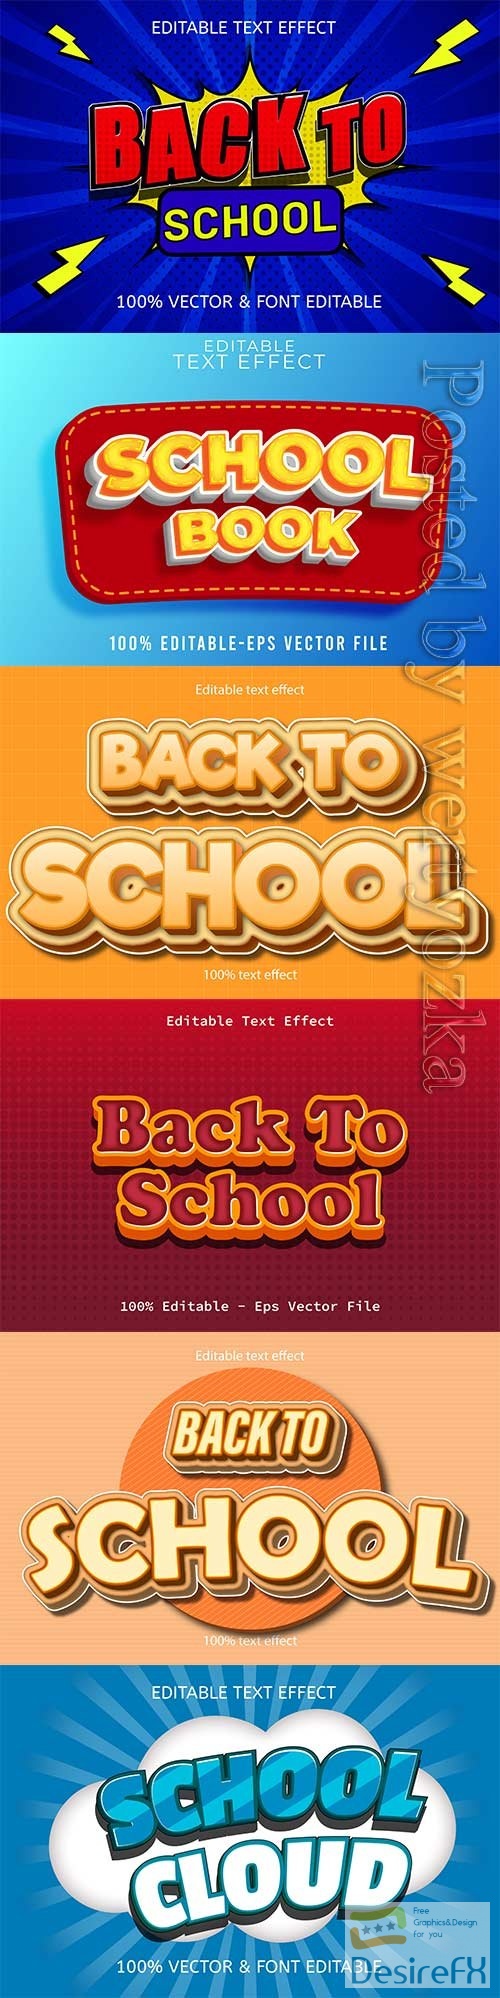 Back to school editable text effect vol 11